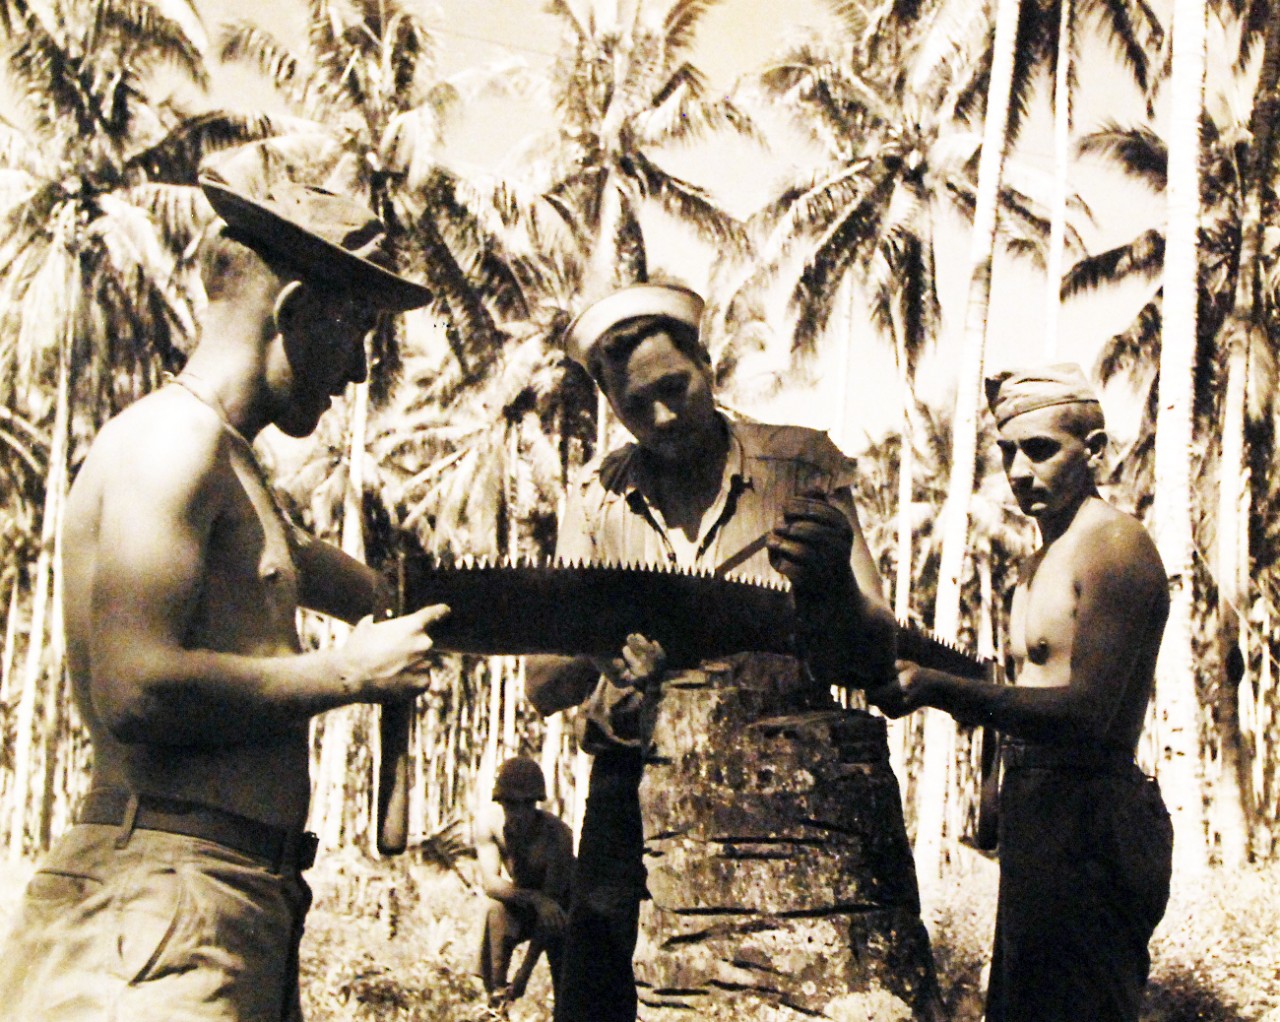 80-G-39219: Guadalcanal Campaign, August 1942-February 1943.  Navy Seabees doing construction work at Guadalcanal, January 30, 1943.  Note the soldiers holding a saw while a Seabee files it. Official U.S. Navy photograph, now in the collections of the National Archives.  (2016/12/06).